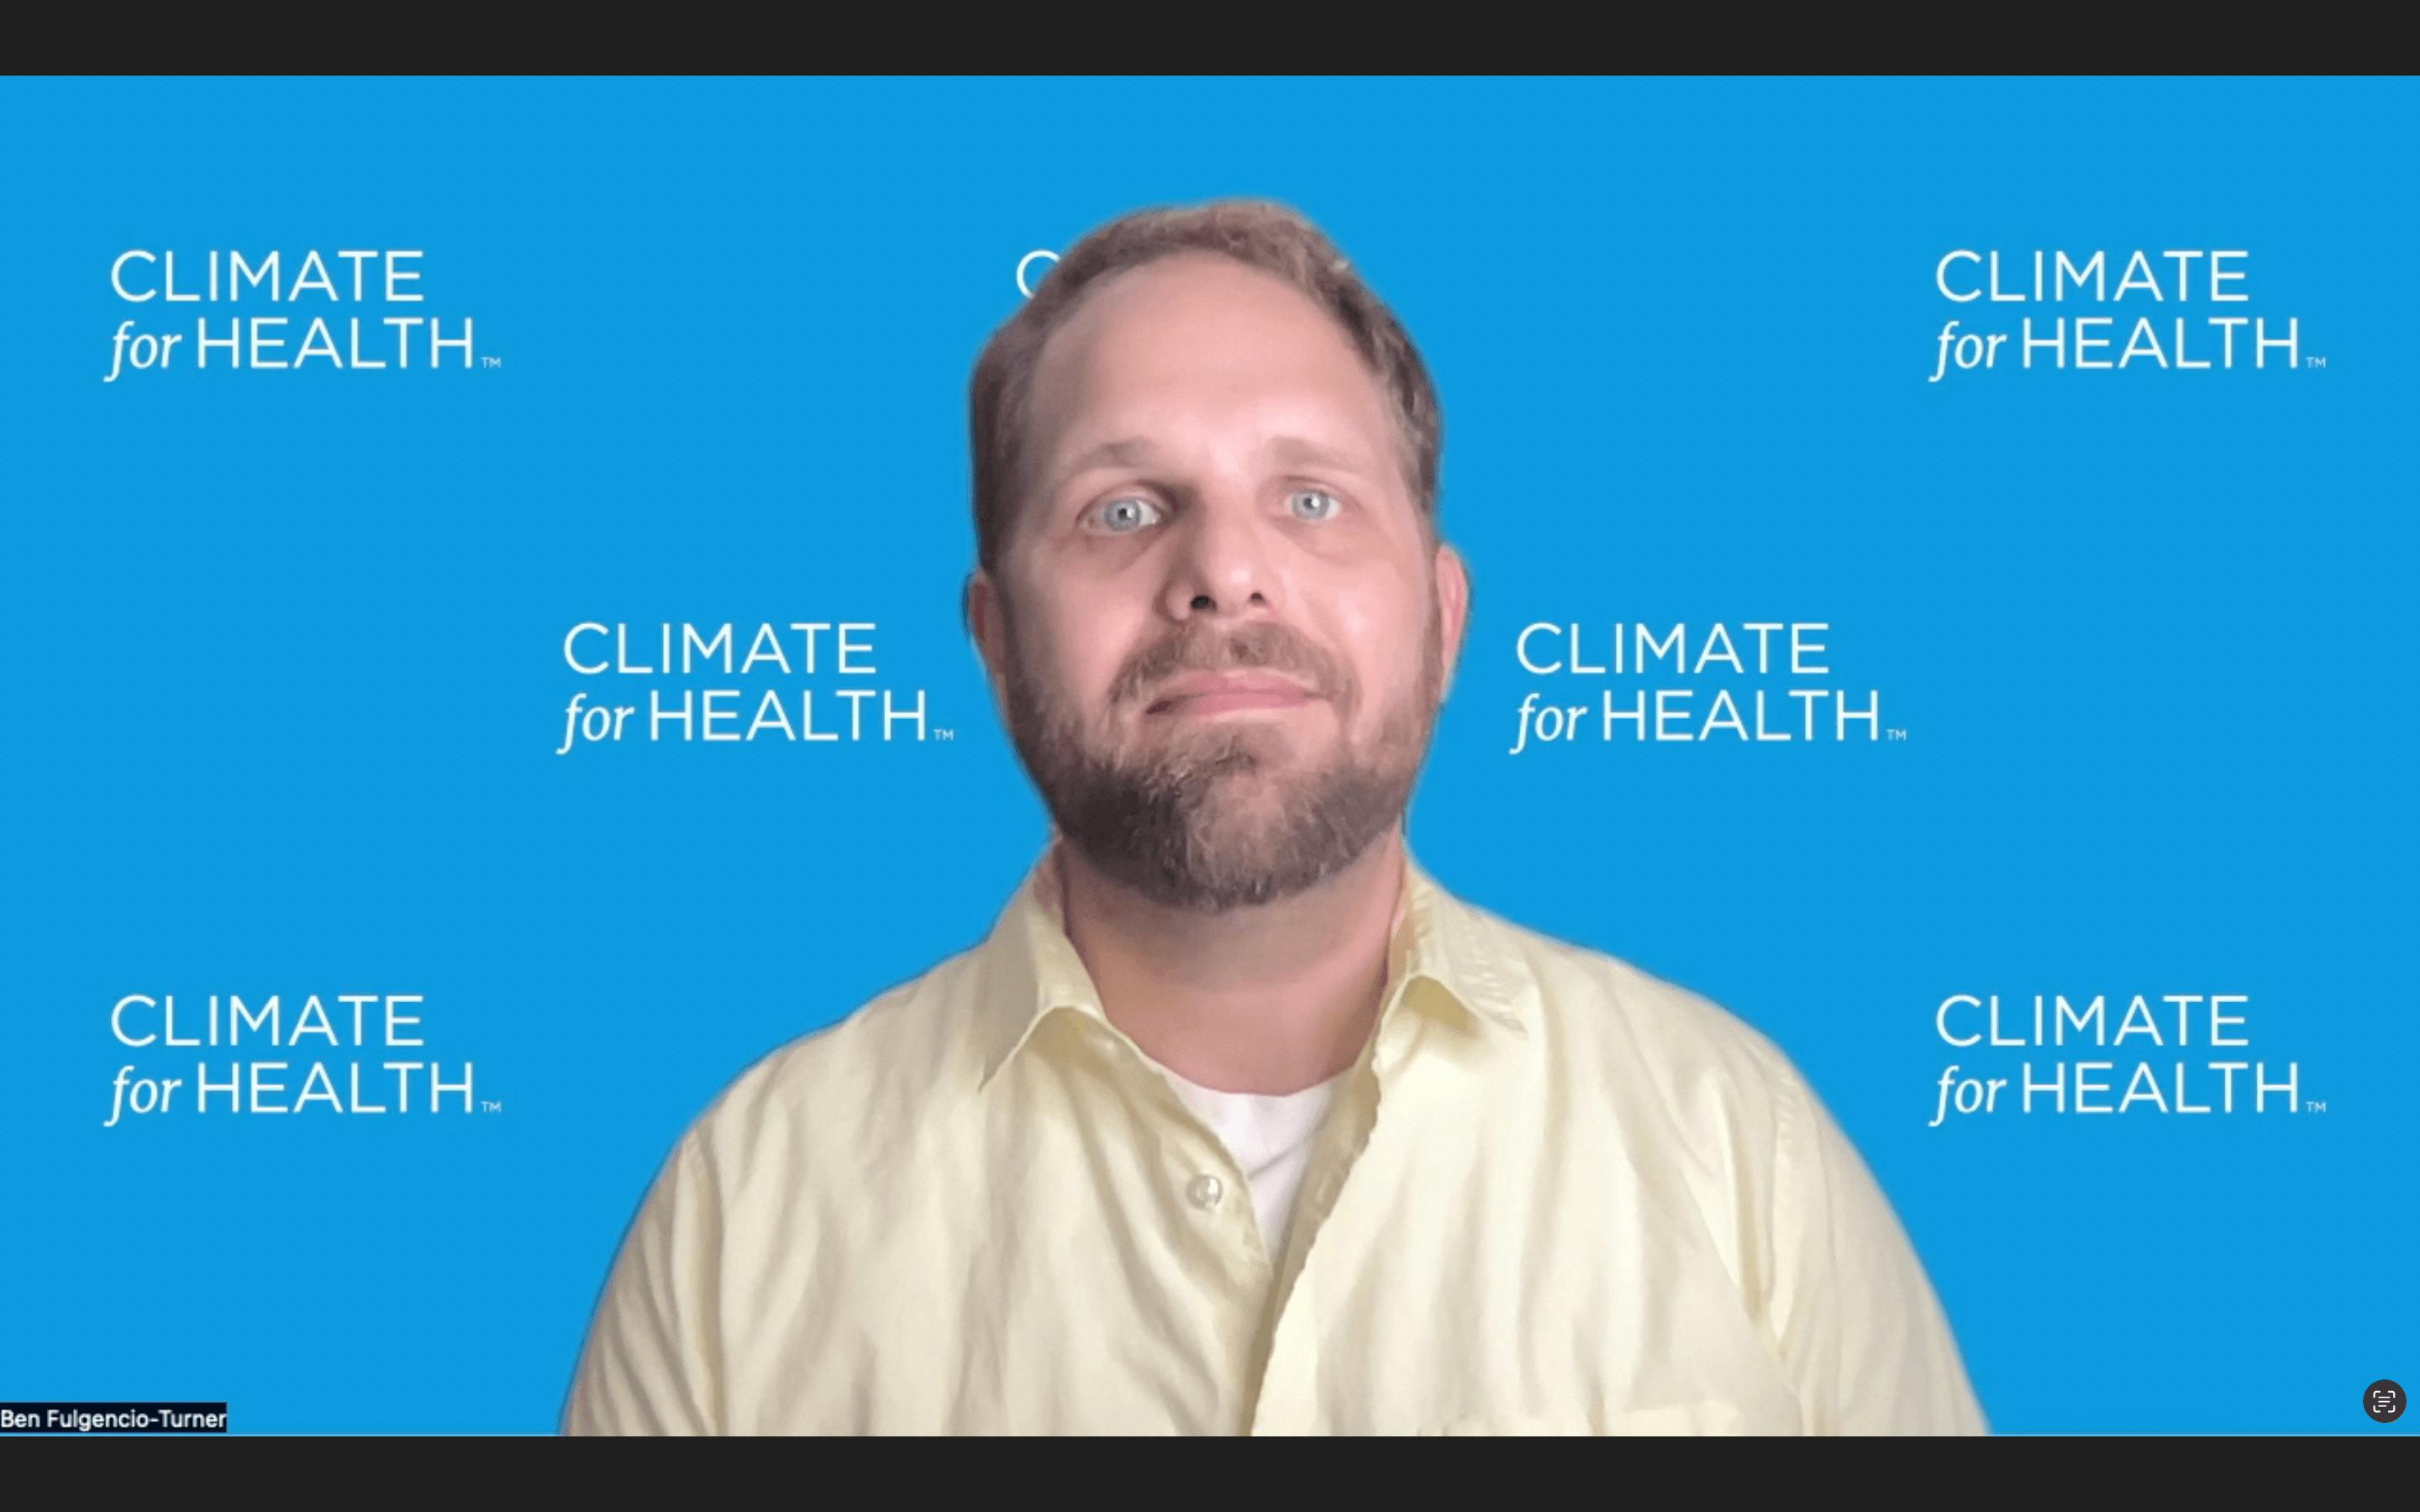 Let’s Talk Climate: From Classrooms to Climate Action: Mobilizing Student Nurses